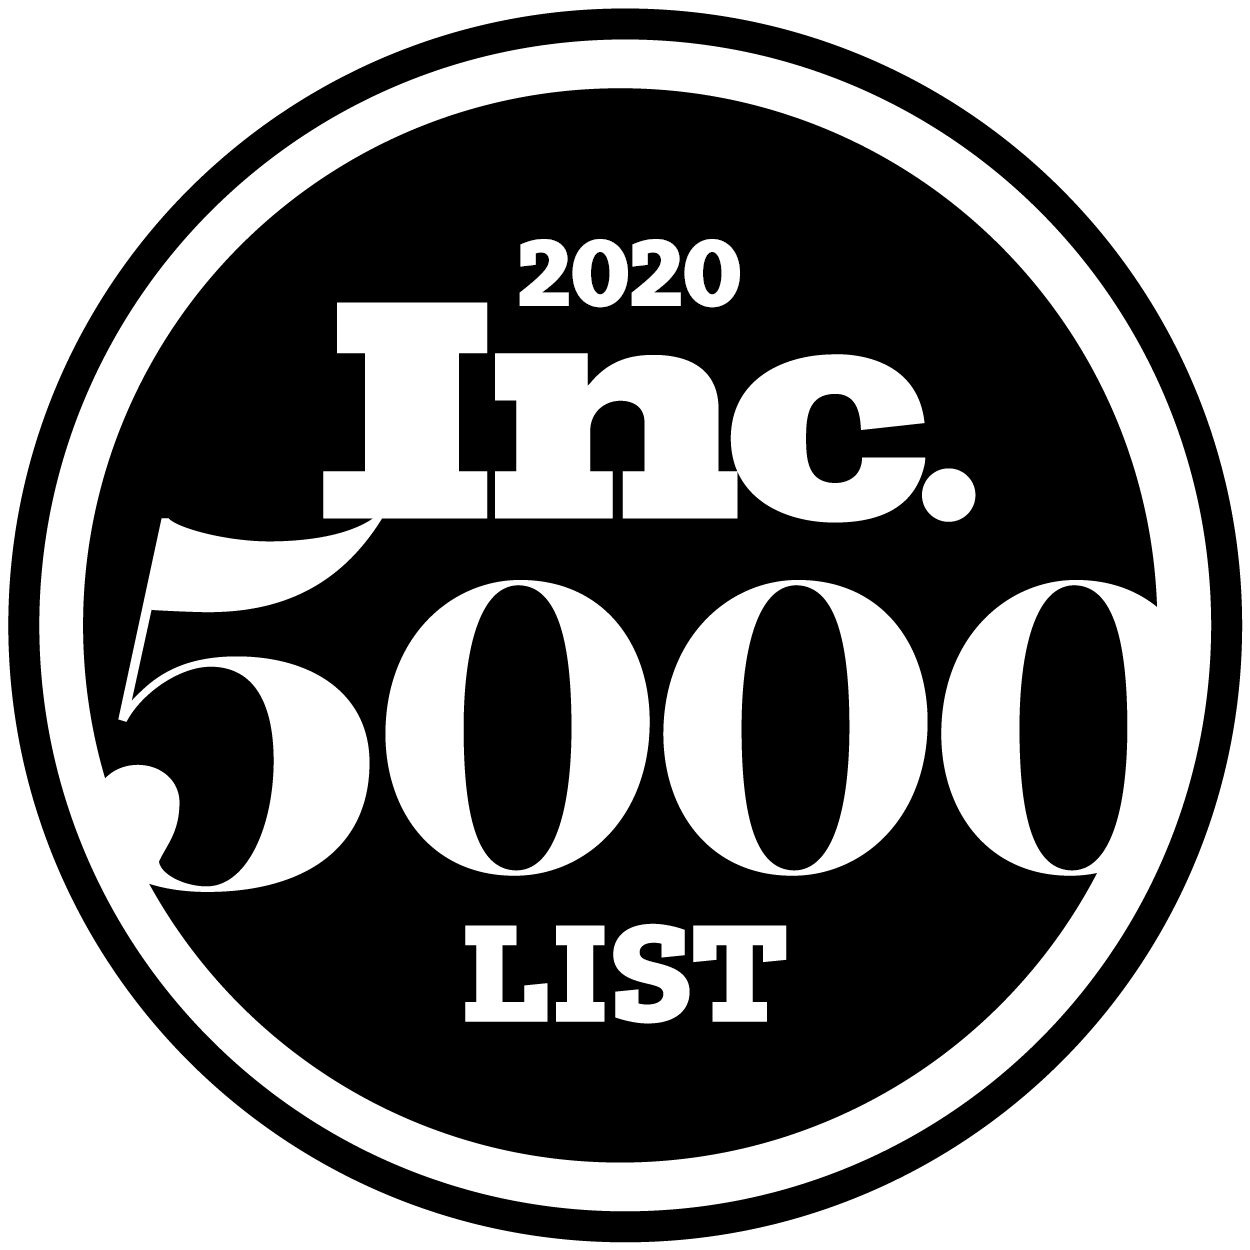 a black circle loco for the 2020 Inc. 5000 List. It has Inc. 5000 List in white on the inner circle and a black circle framing the logo